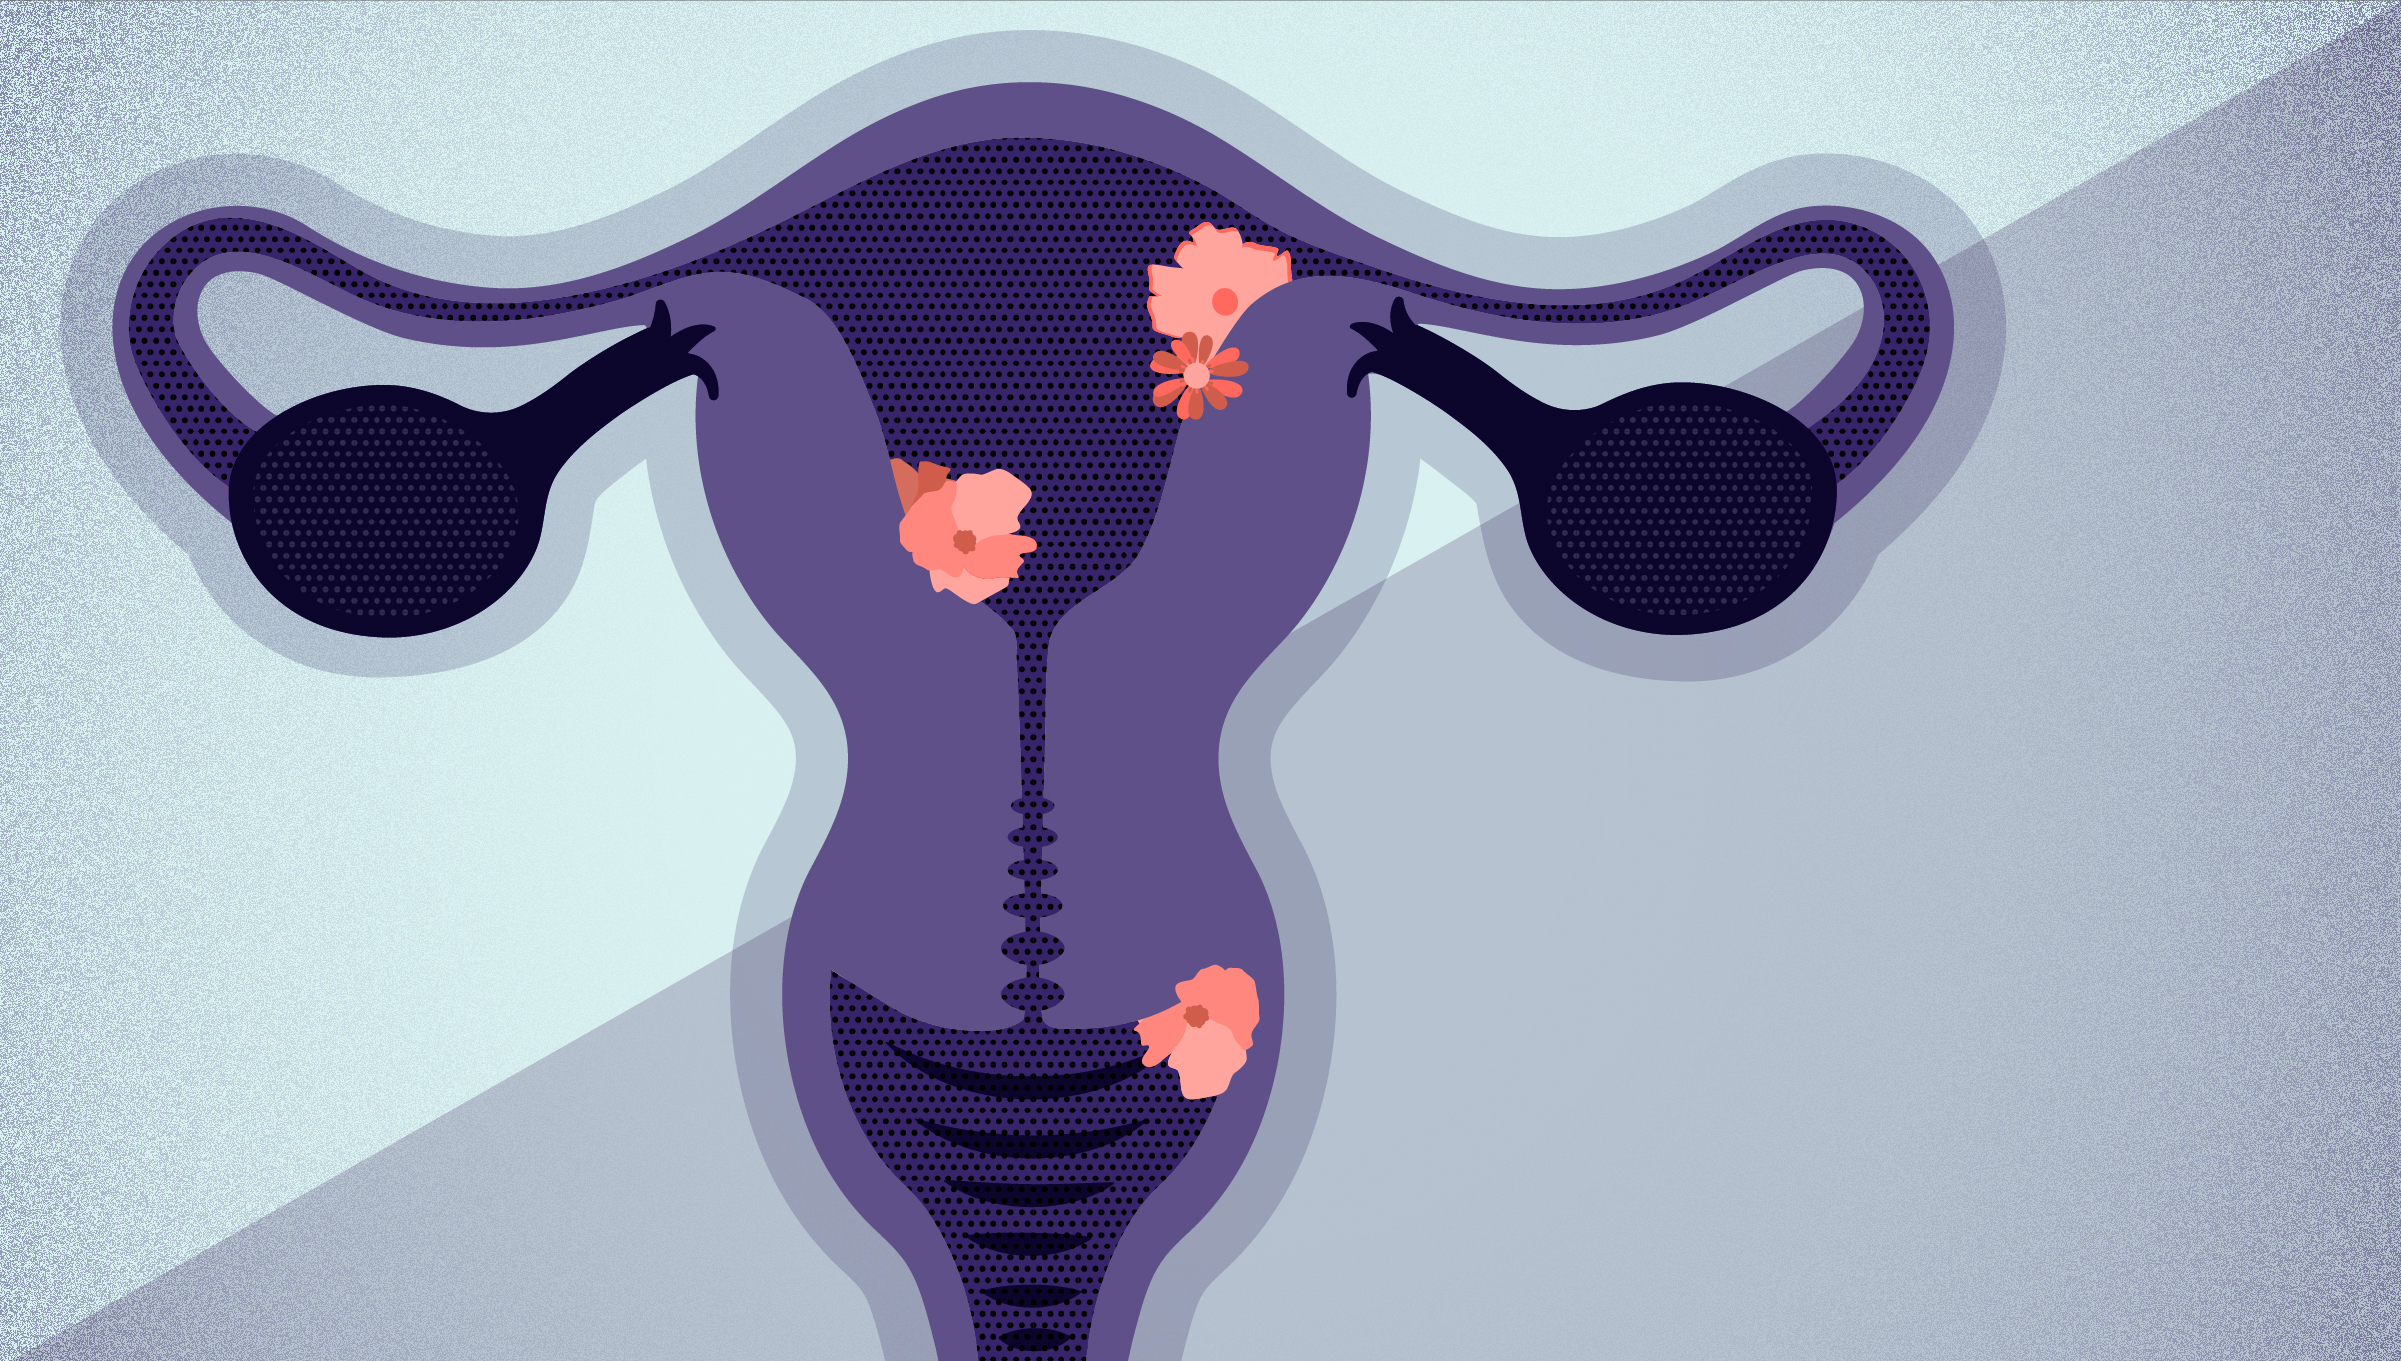 An illustration of the vagina and ovaries.